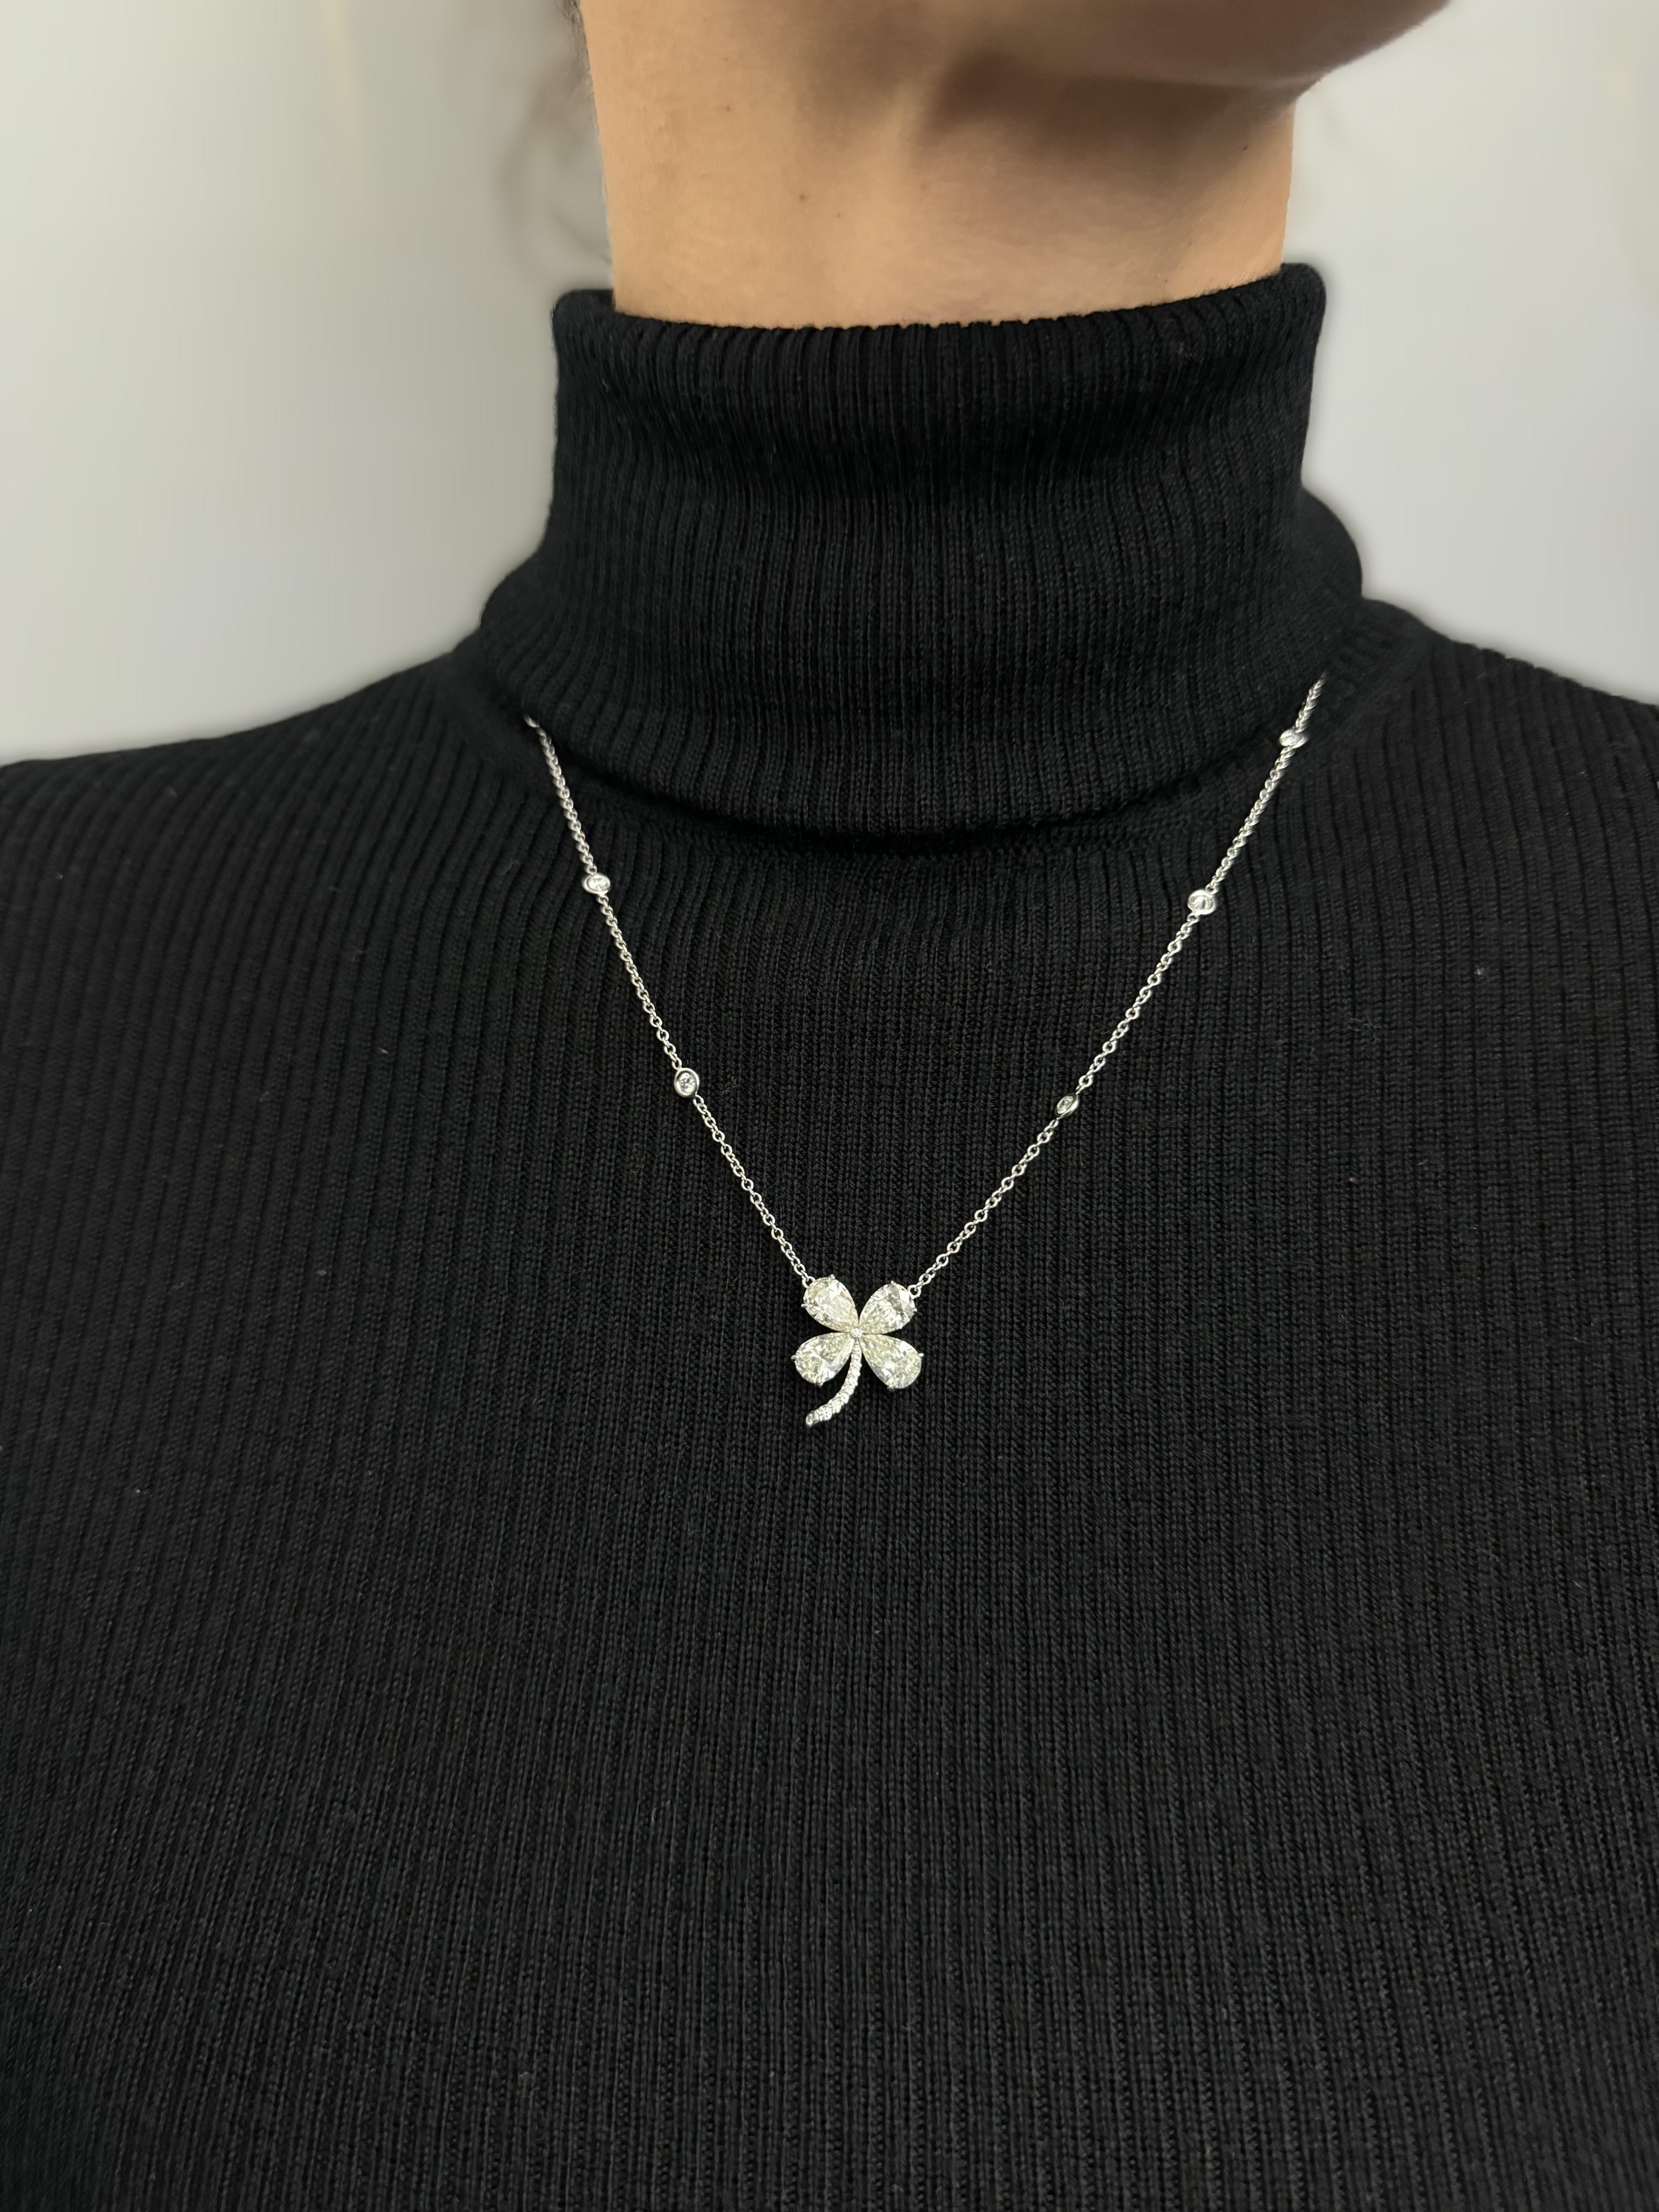 5 Carat Diamond Clover Pendant In New Condition For Sale In New York, NY